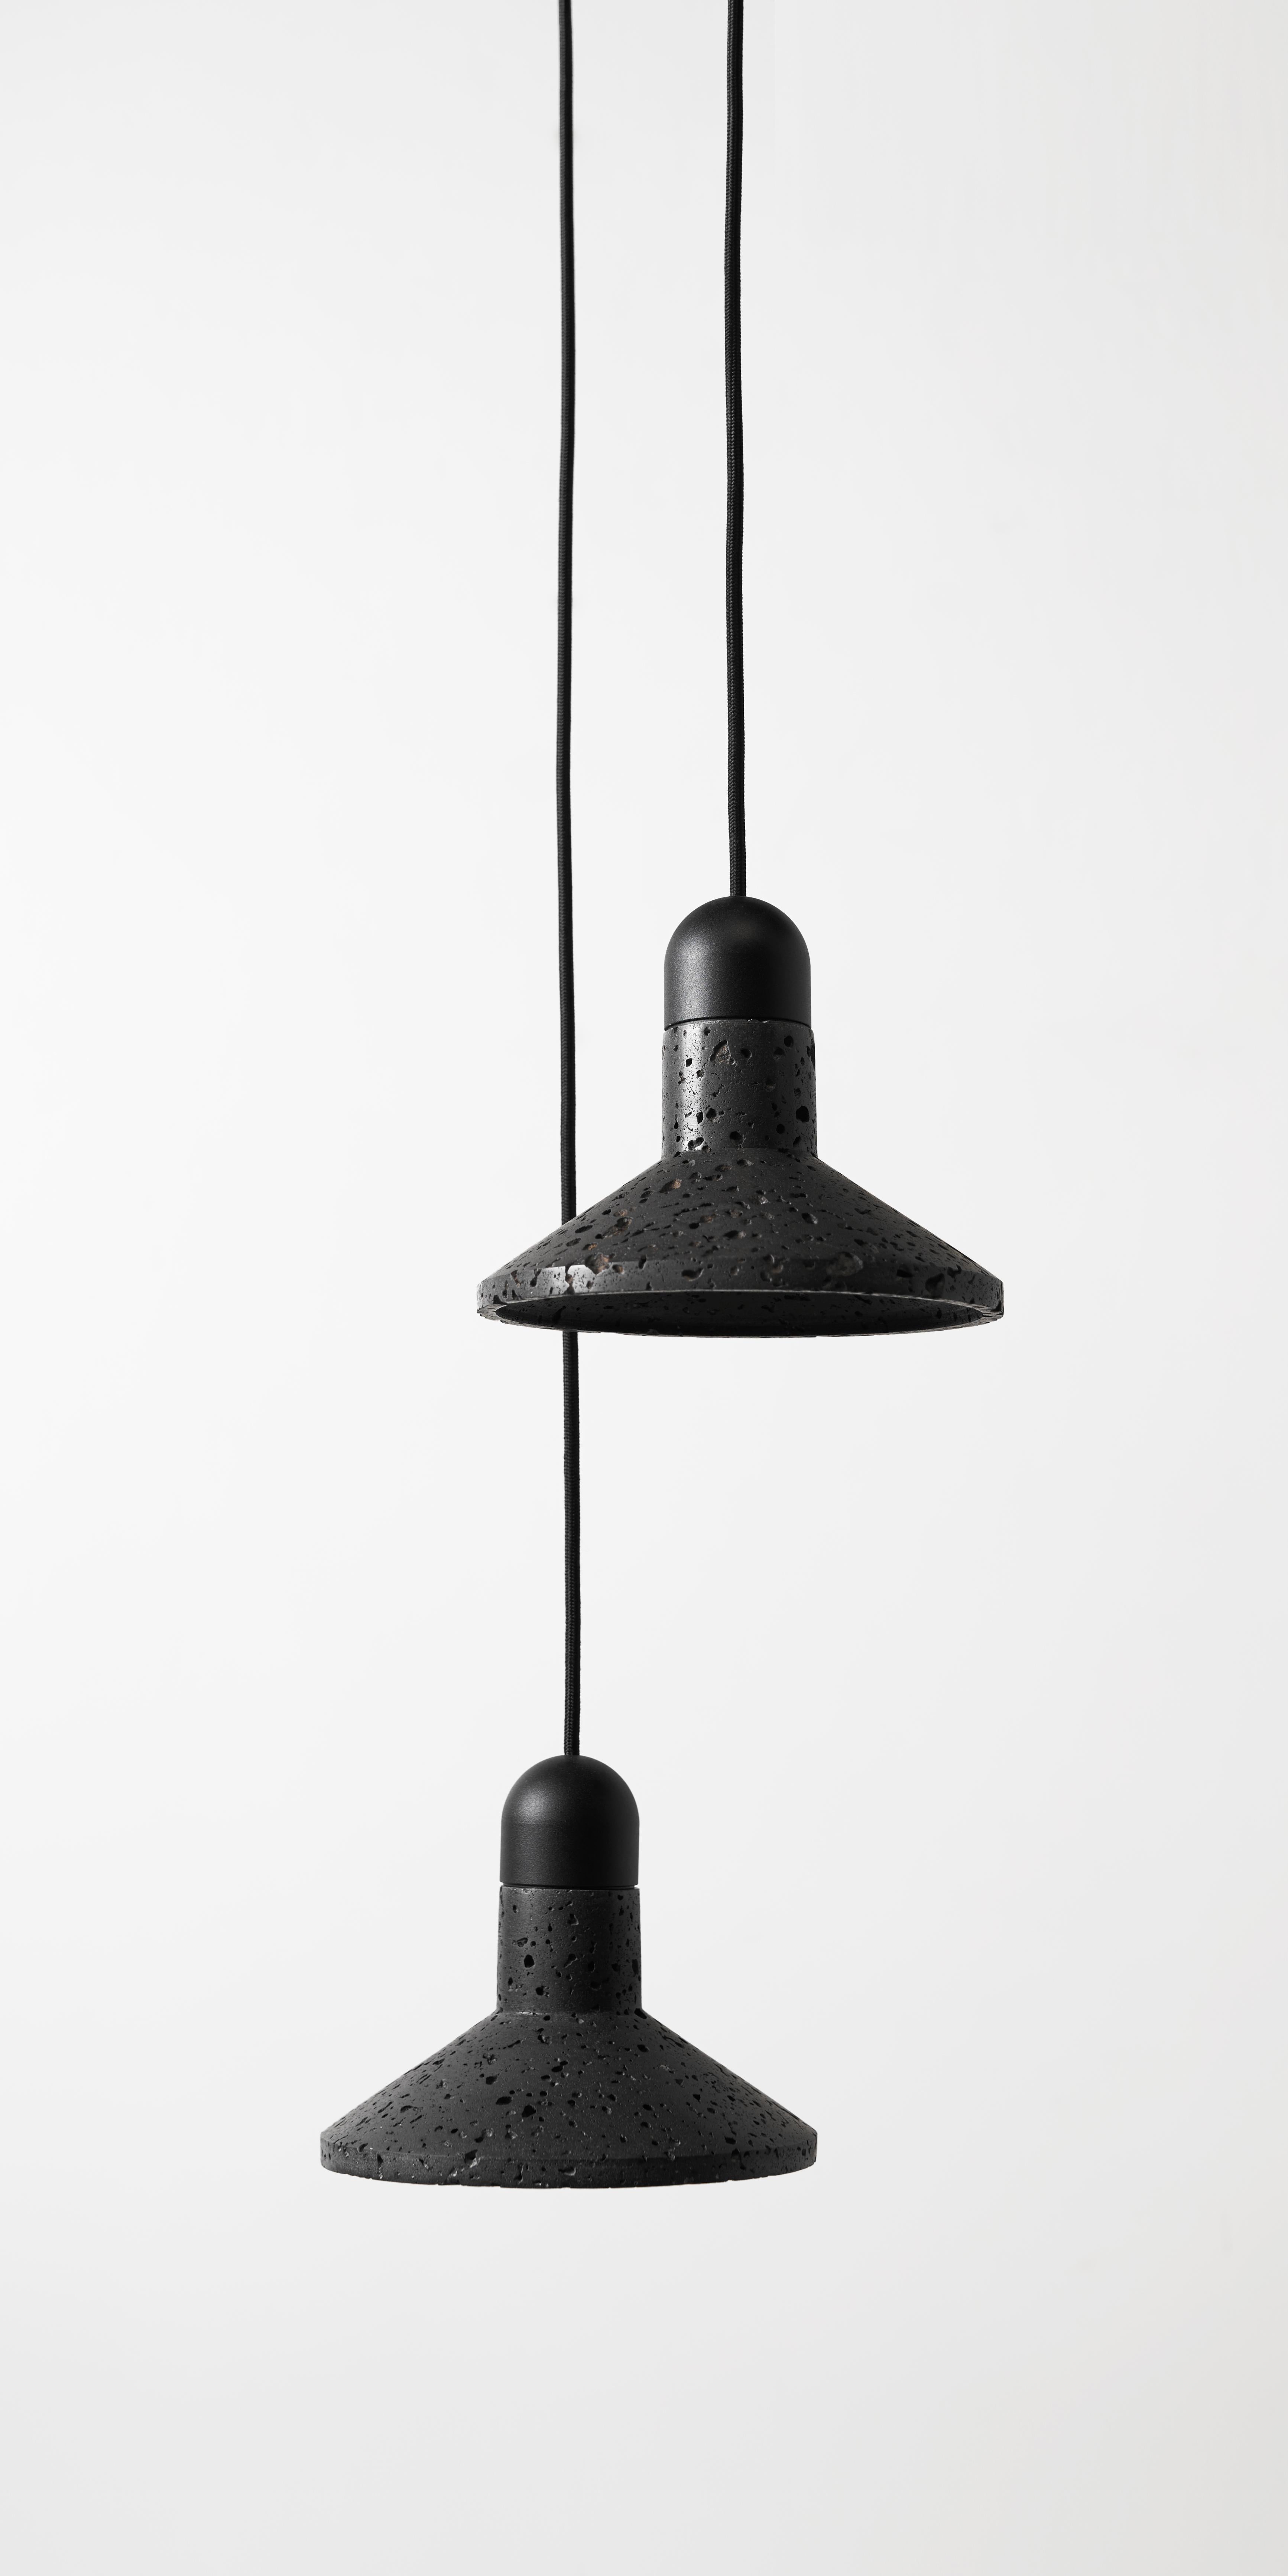 Chinese Lava Stone and Aluminum Pendant Light, “Shang, ” by Buzao